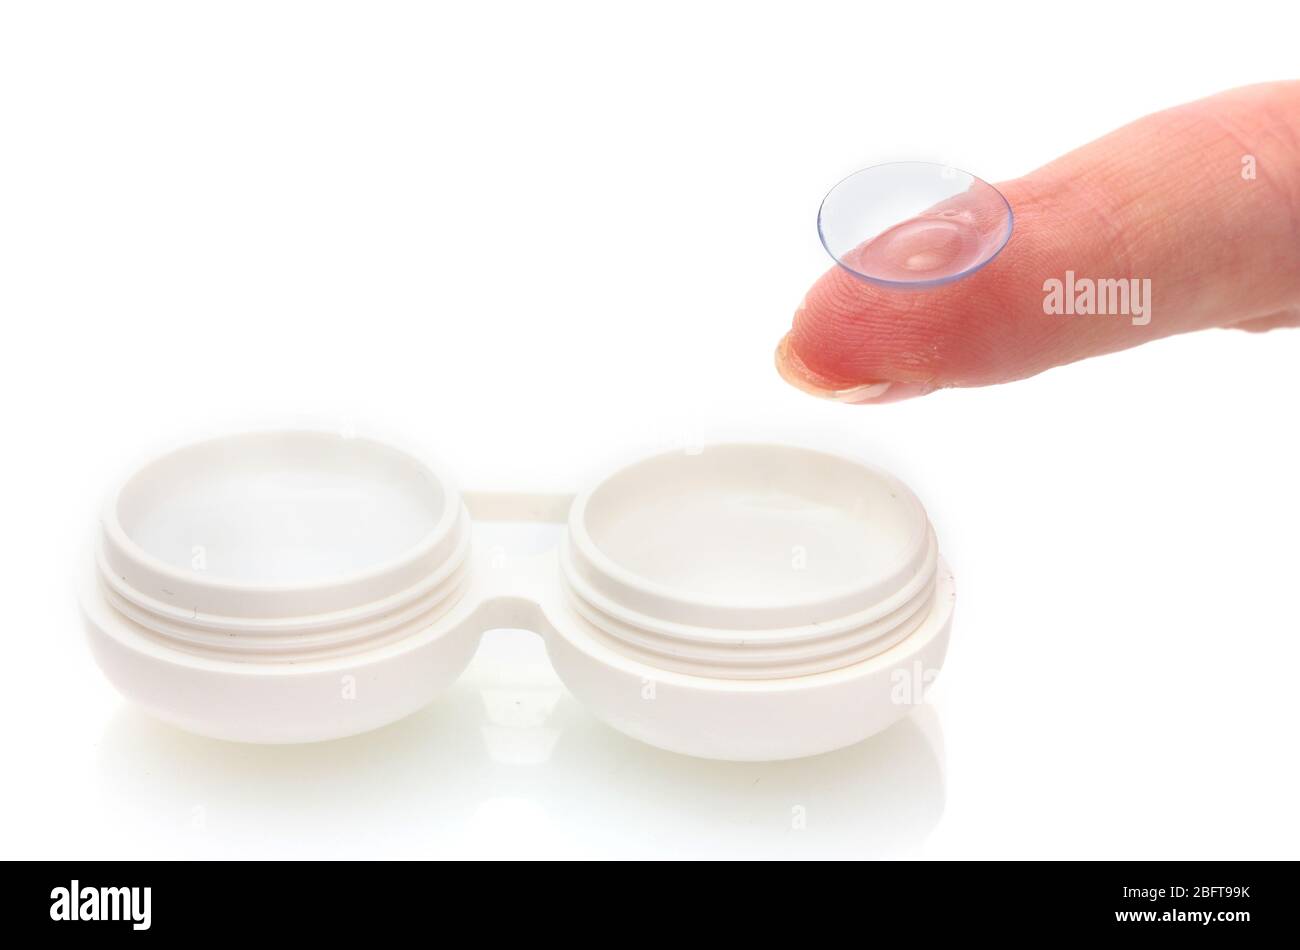 contact lens on finger and case isolated on white Stock Photo